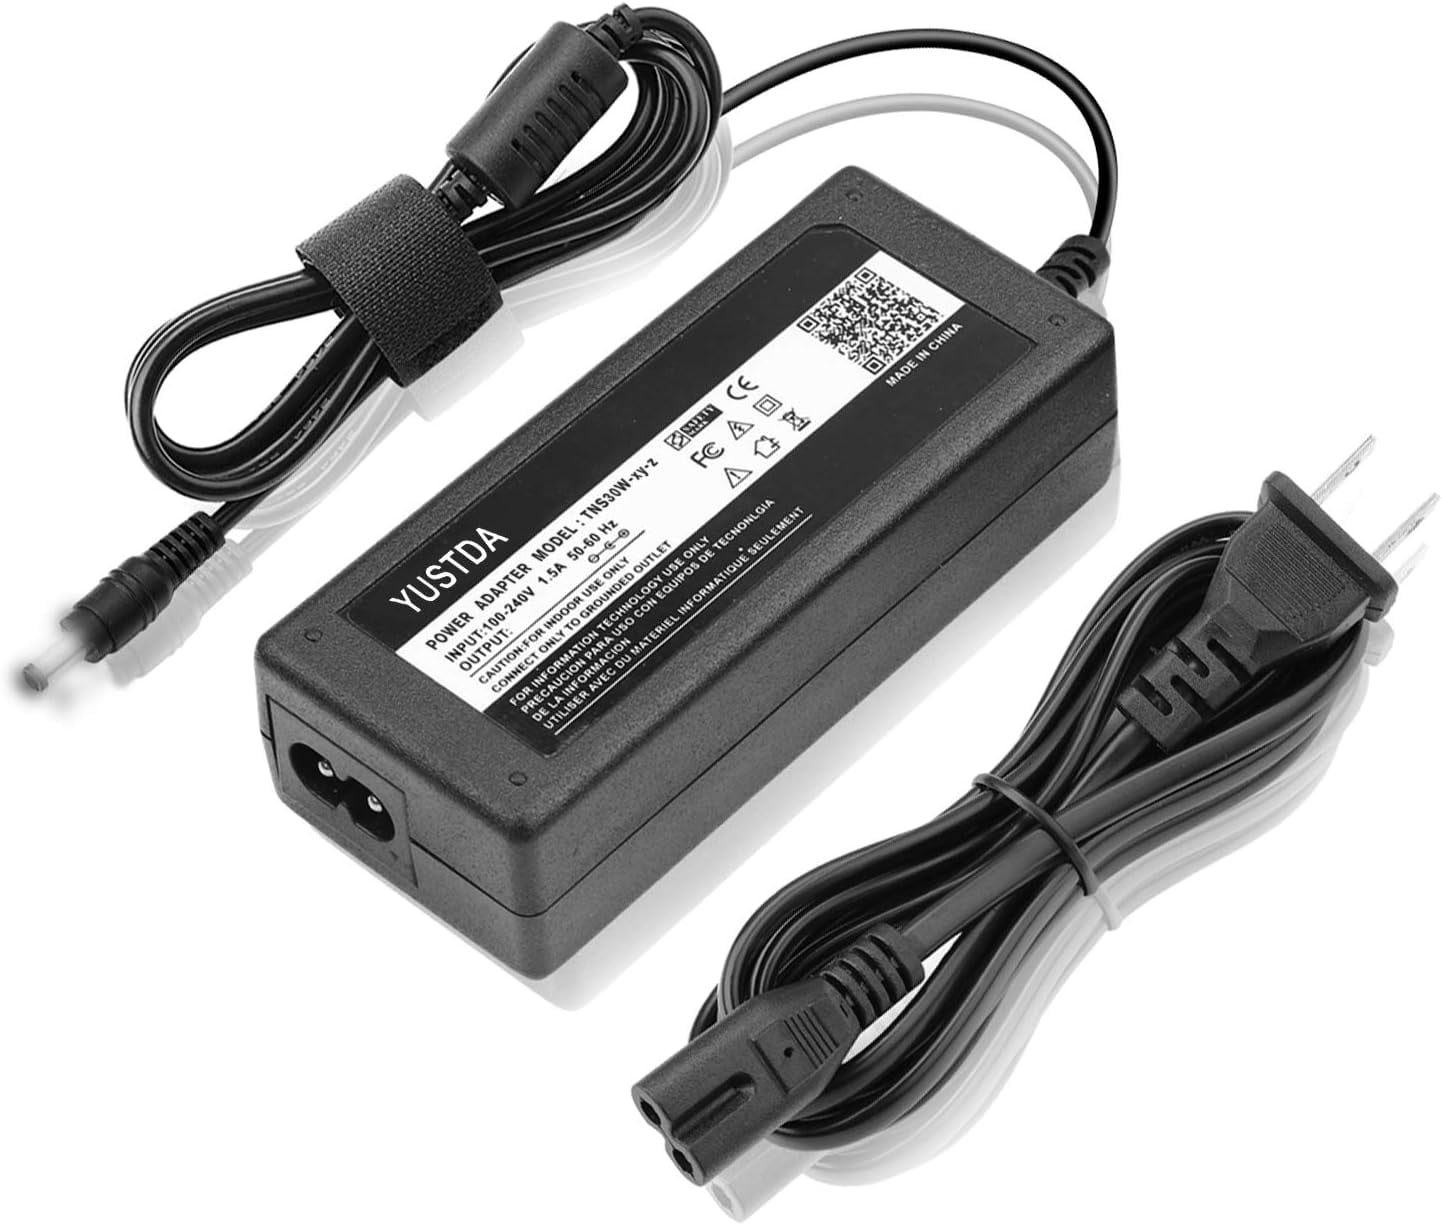 UpBright AC DC Adapter Compatible with Acer ED320 ED320QR Sbiipx ED322QR  Pbmiipx UM.JE0AA.S01 UM.JE0AA.S03 UM.JE0EE.P04 31.5” UM.JE2AA.P01 HD LCD  Curved Gaming Monitor Power SupplyCord Cable Charger 